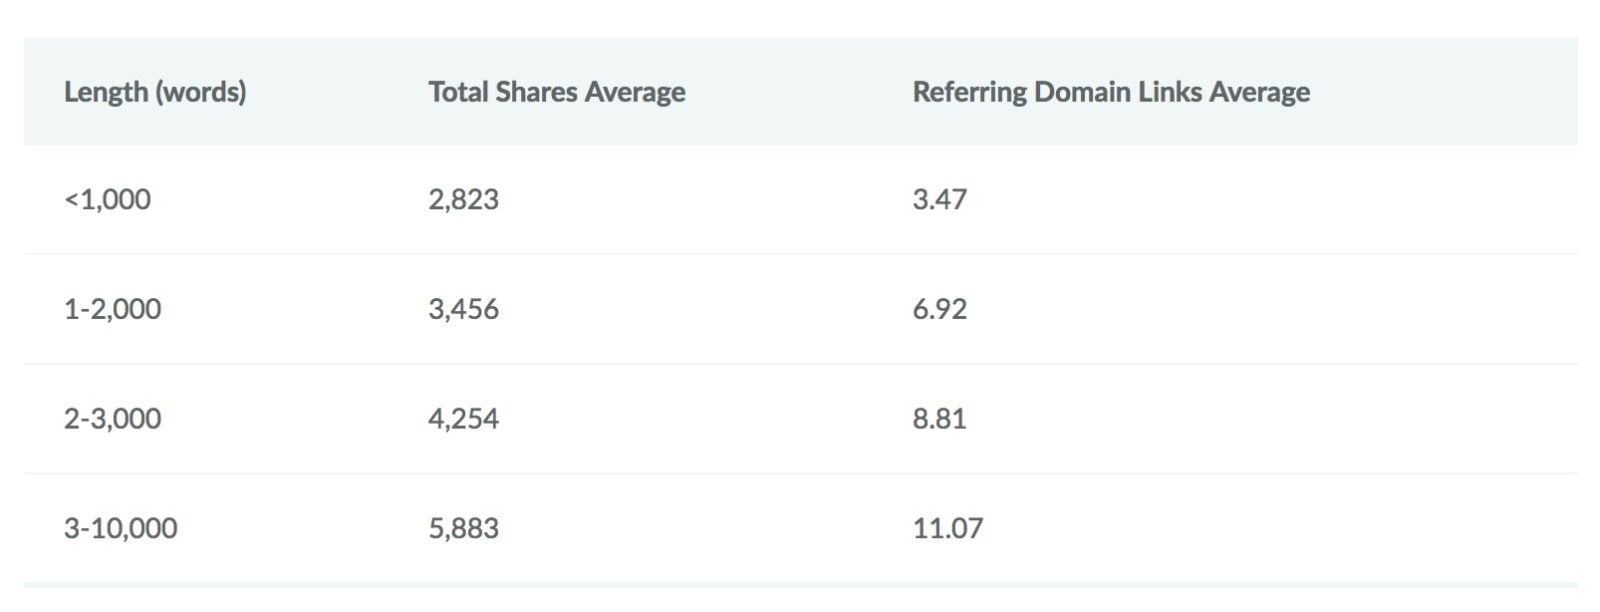 Table showing average total shares and referring domain links by article length, with ranges from under 1000 words to 3-10,000 words.